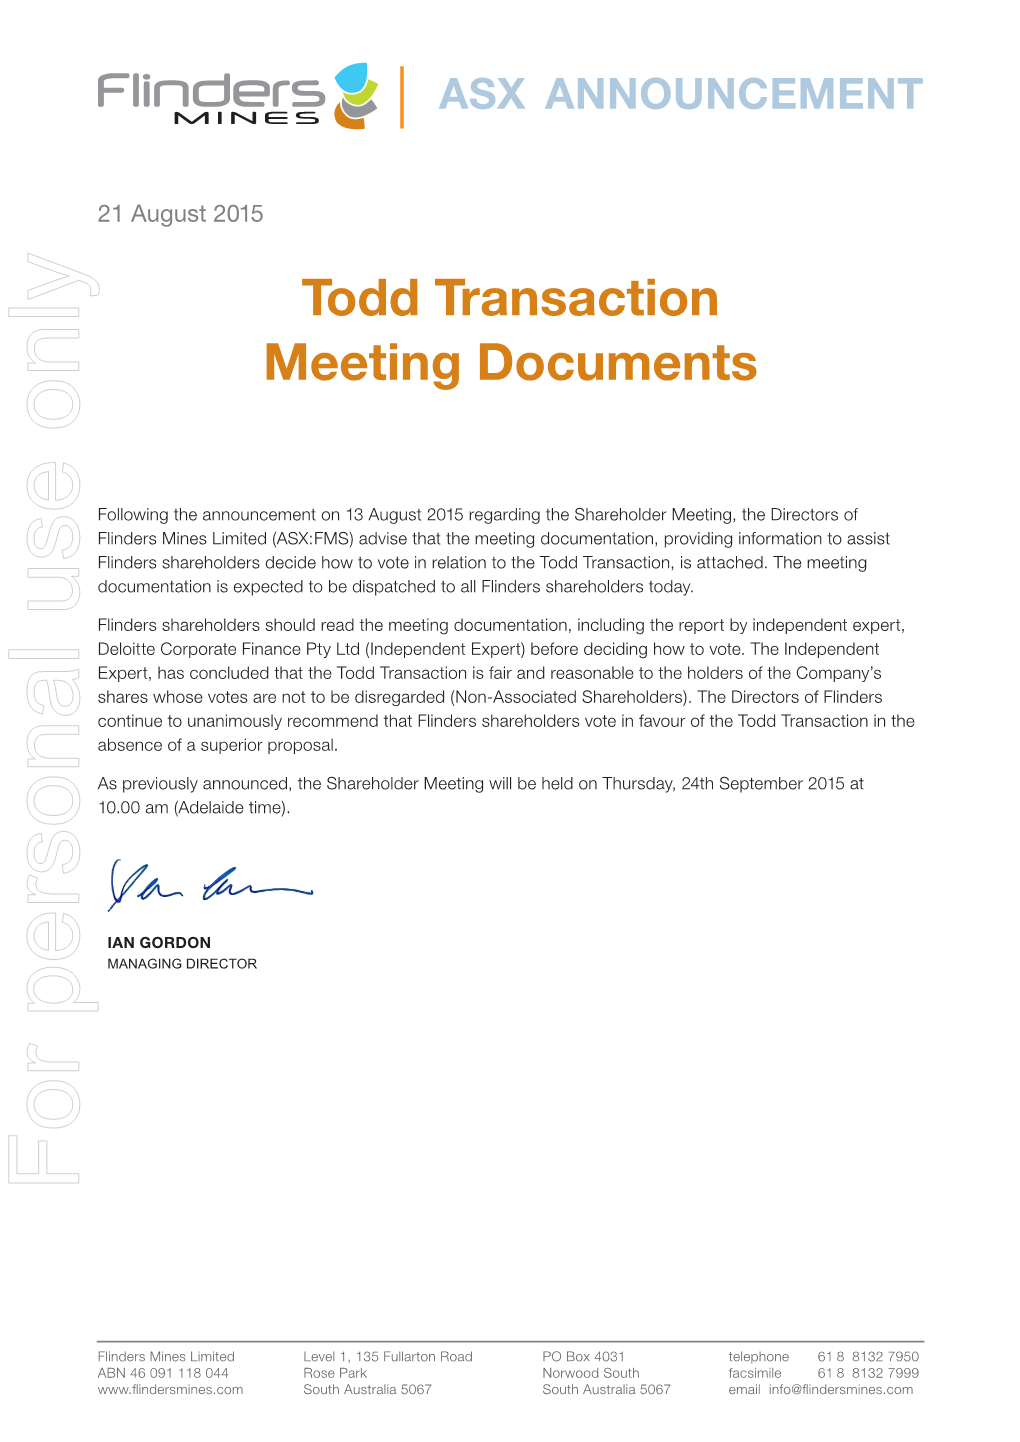 Todd Transaction Meeting Documents ASX